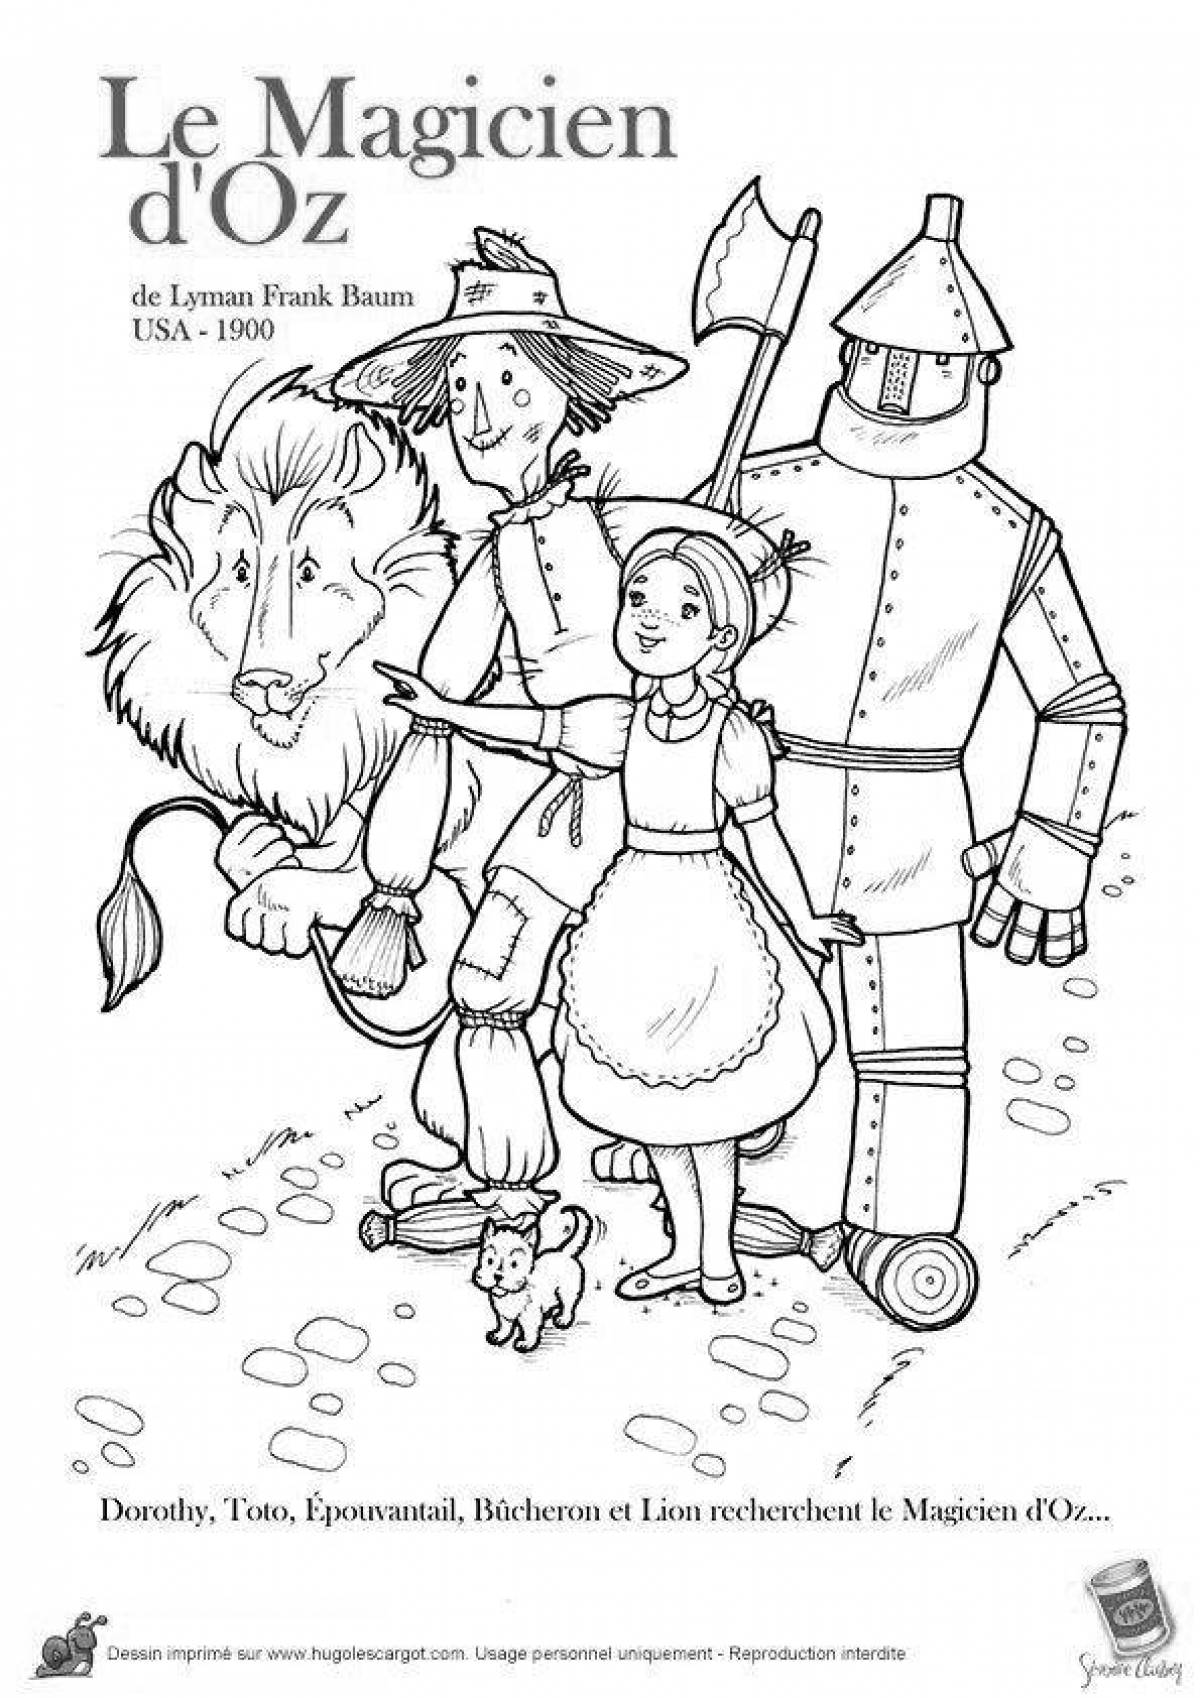 The living wizard of oz coloring book